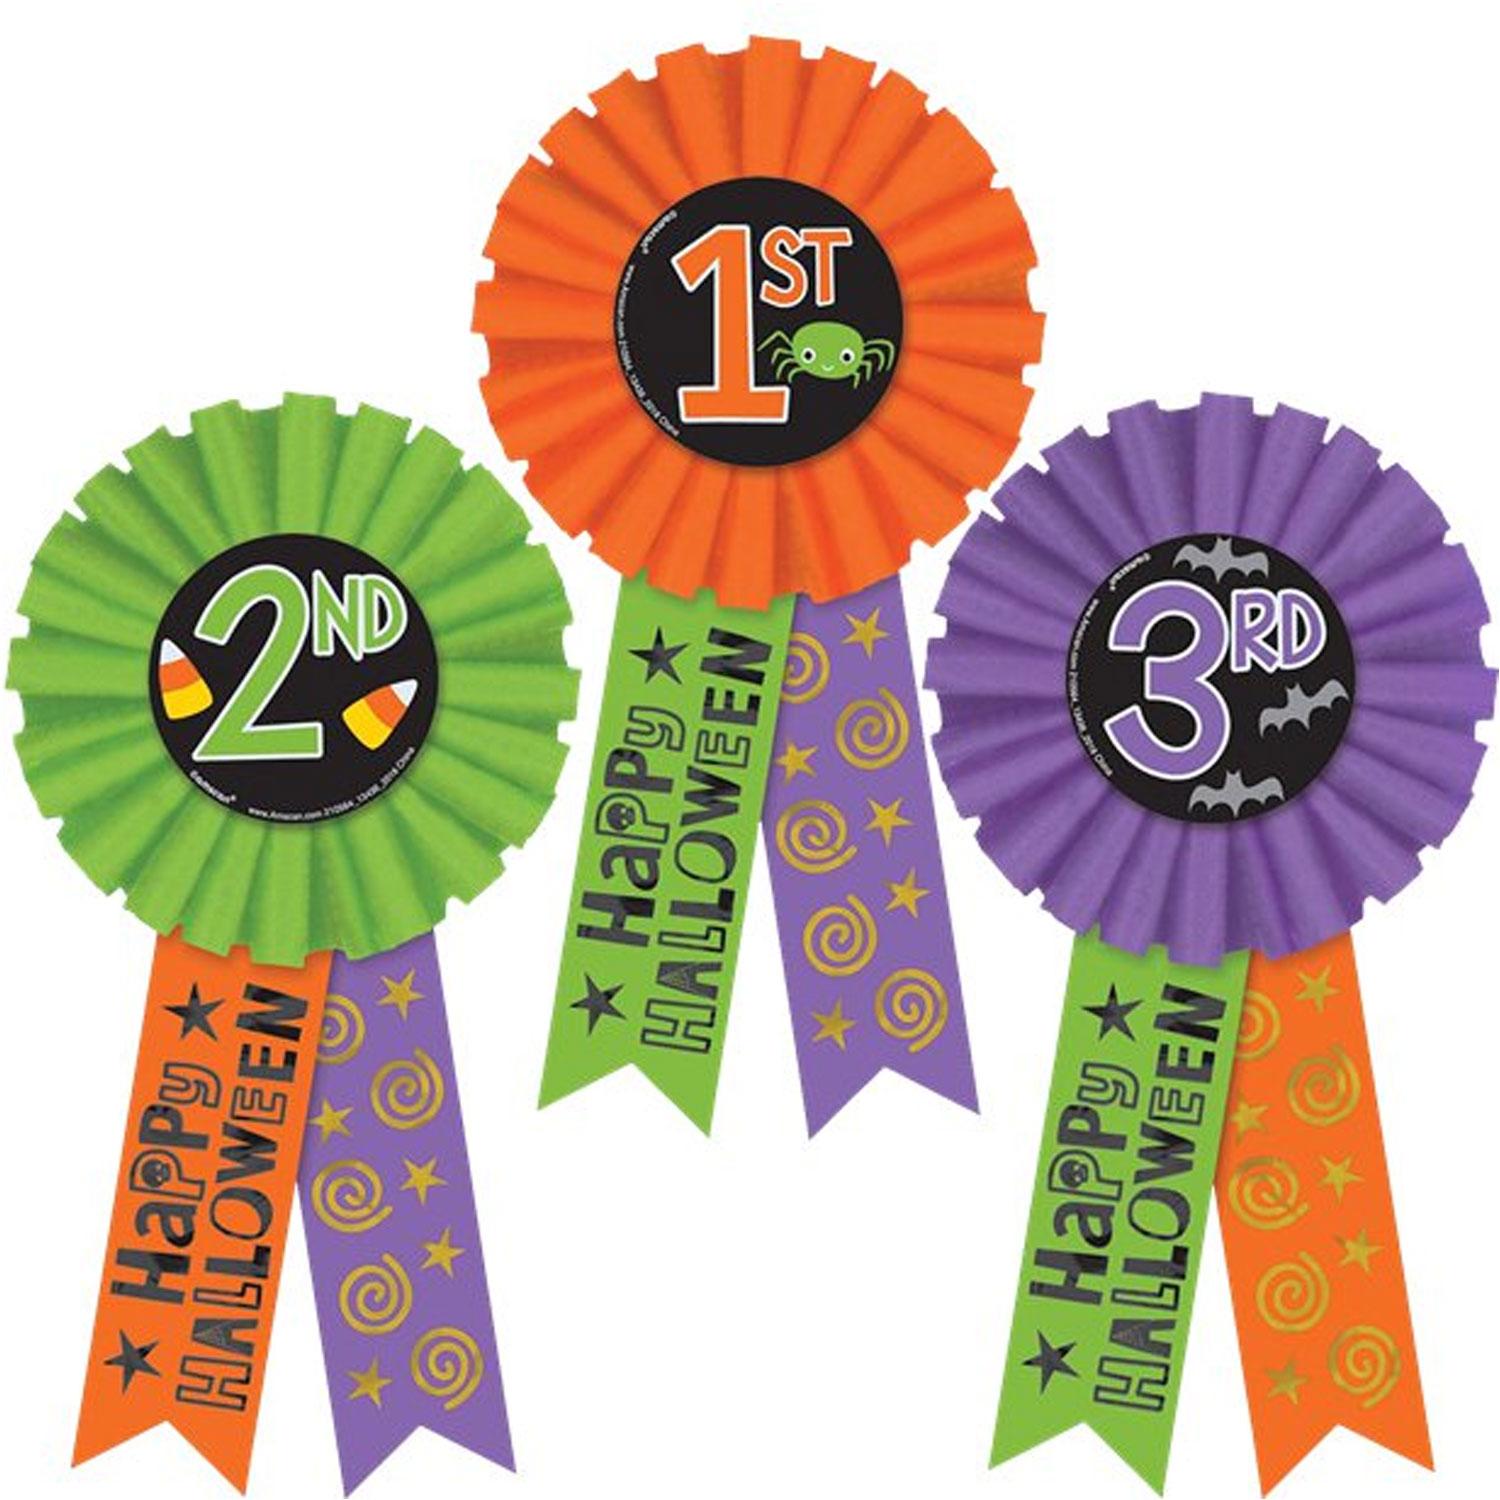 Pack of 3 Halloween Award Rosettes and Ribbons by Amscan 210564 available here at Karnival Costumes online Halloween party shop